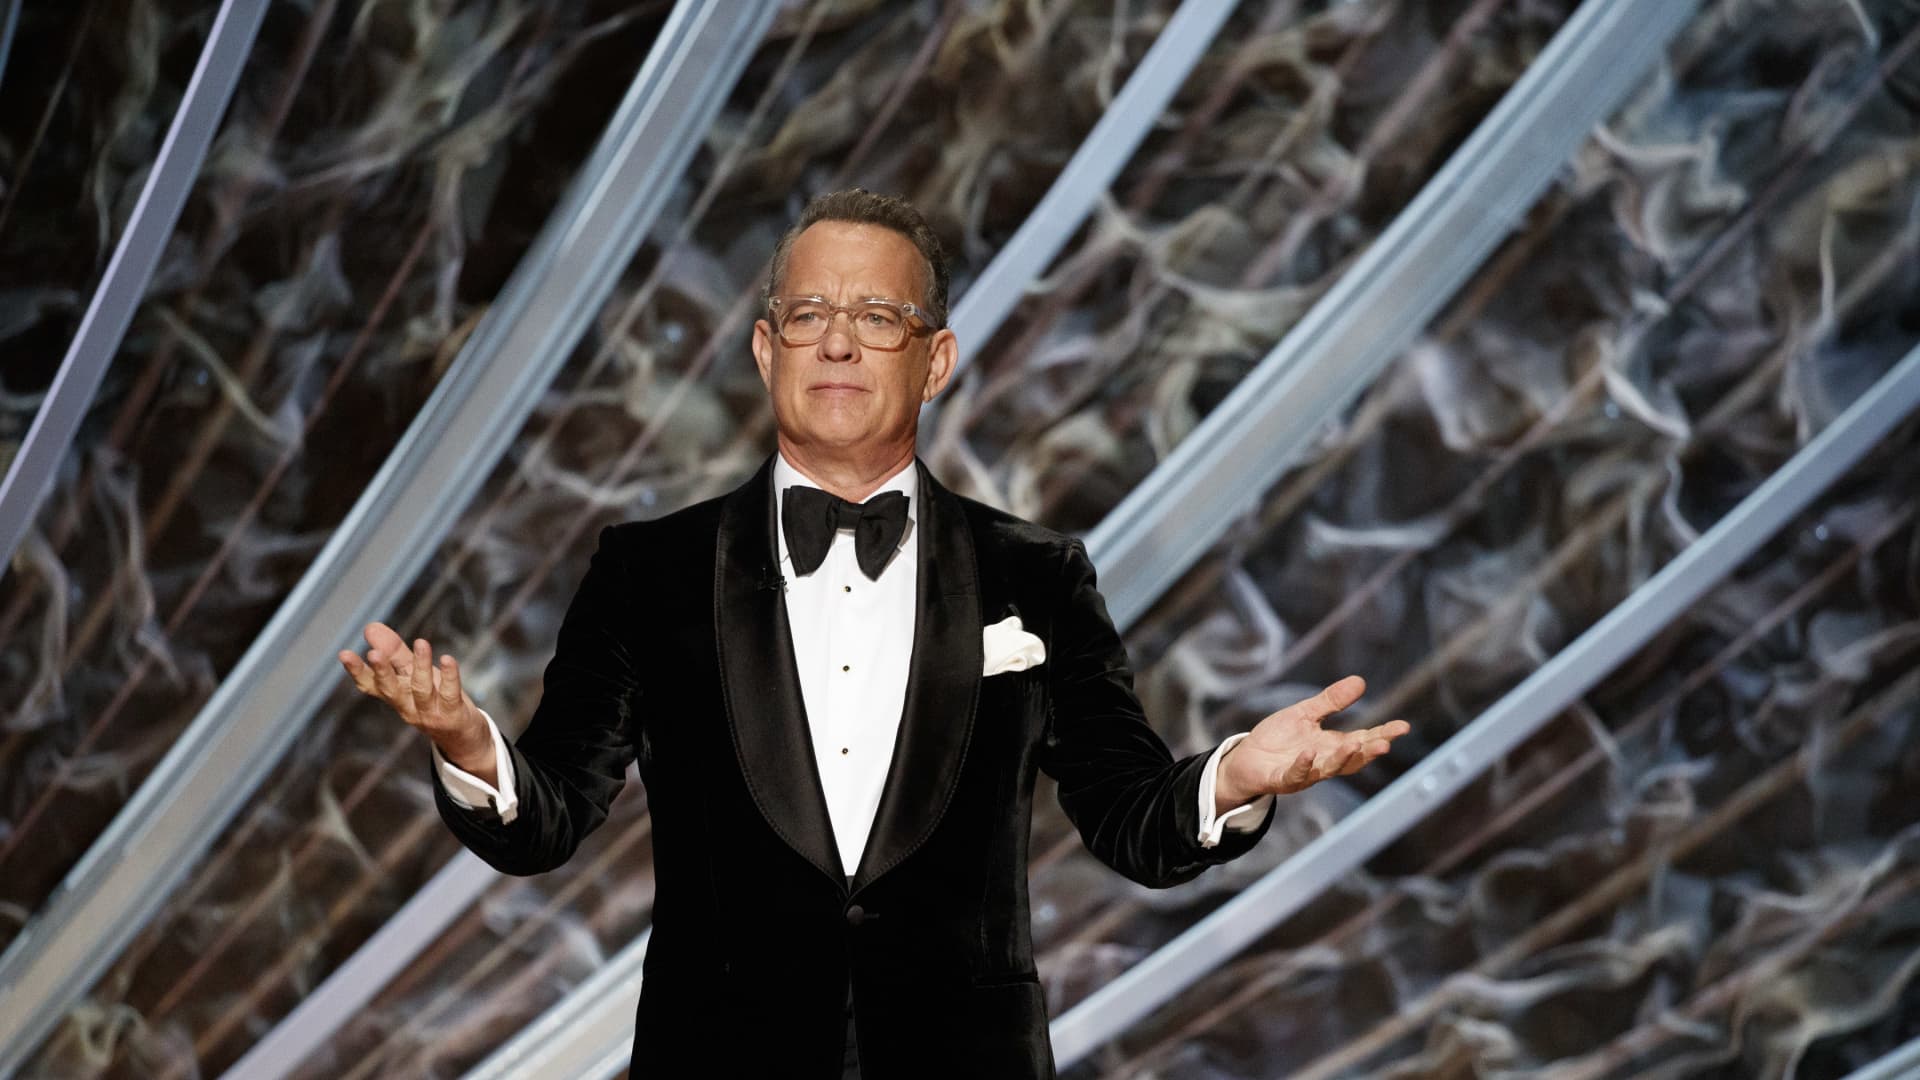 2-time Oscar winner Tom Hanks says he's made 4 'pretty good' movies in his 40-year career - CNBC